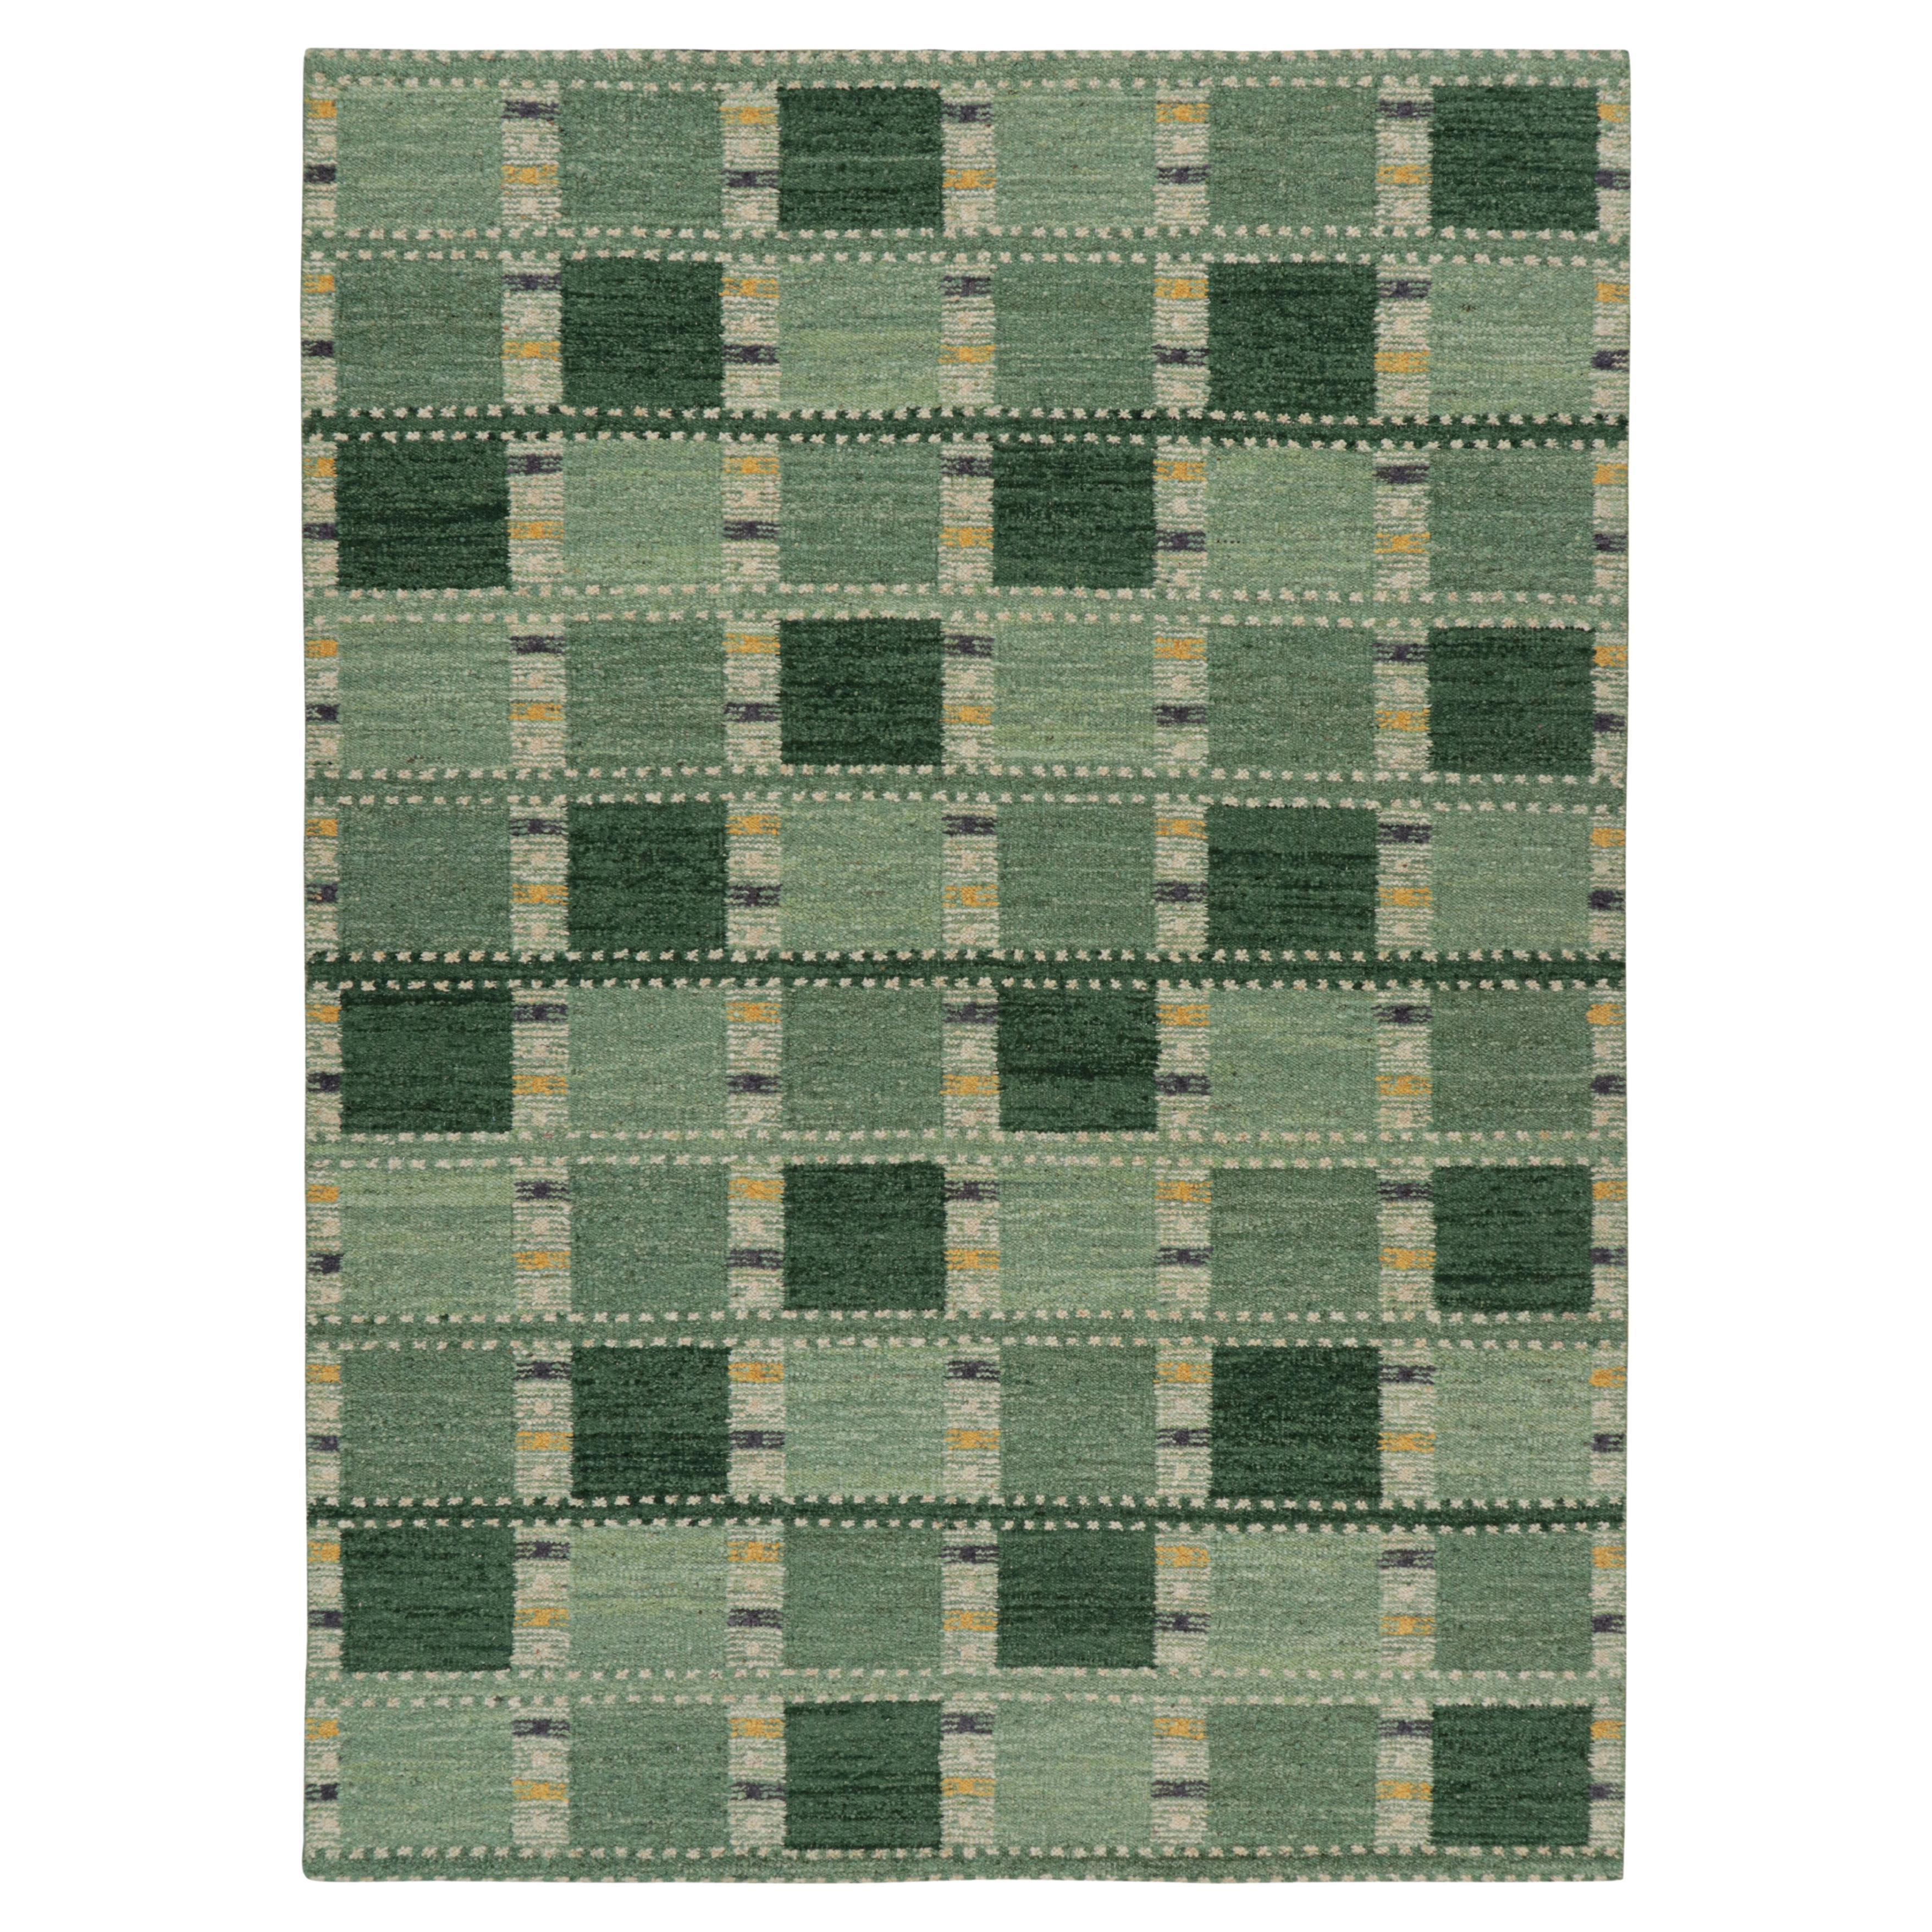 Rug & Kilim’s Scandinavian Style Rug in Green Tones, with Geometric Patterns For Sale